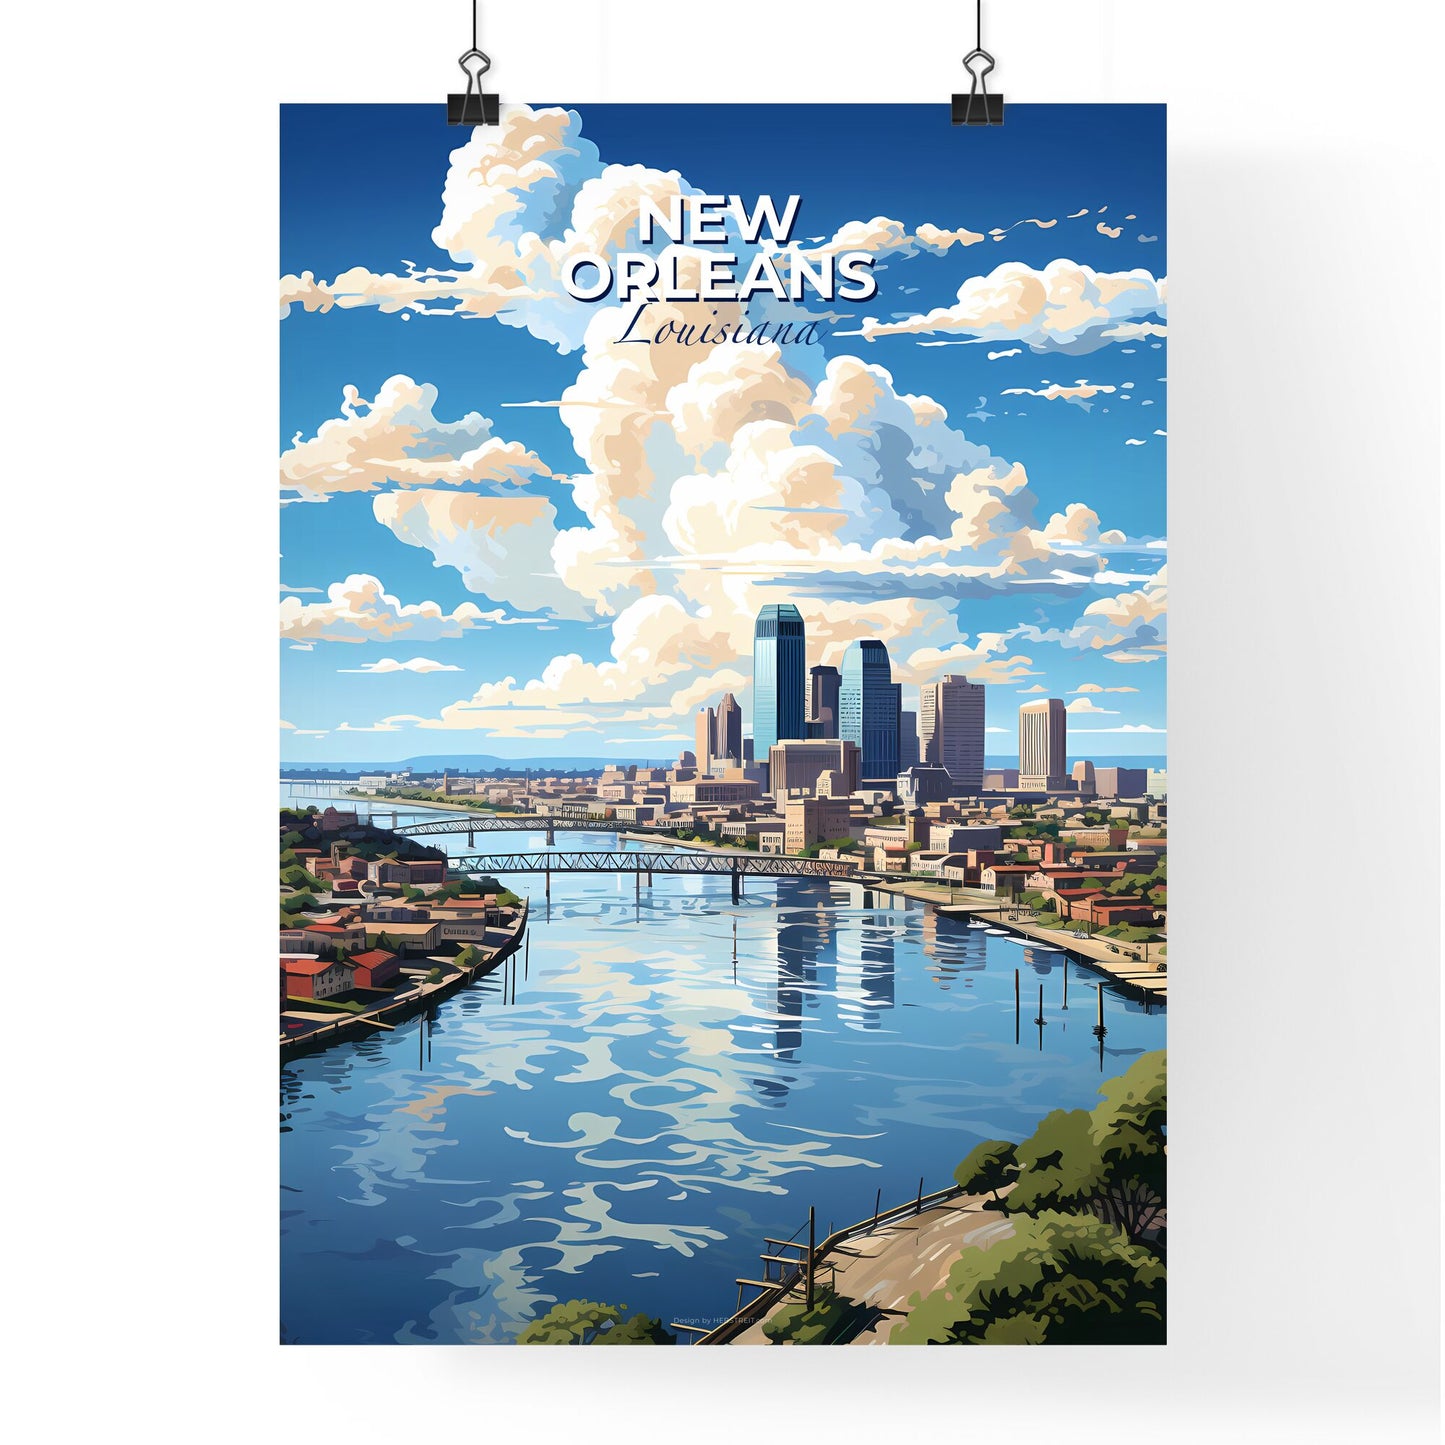 New Orleans Louisiana Skyline - A City Next To A River - Customizable Travel Gift Default Title